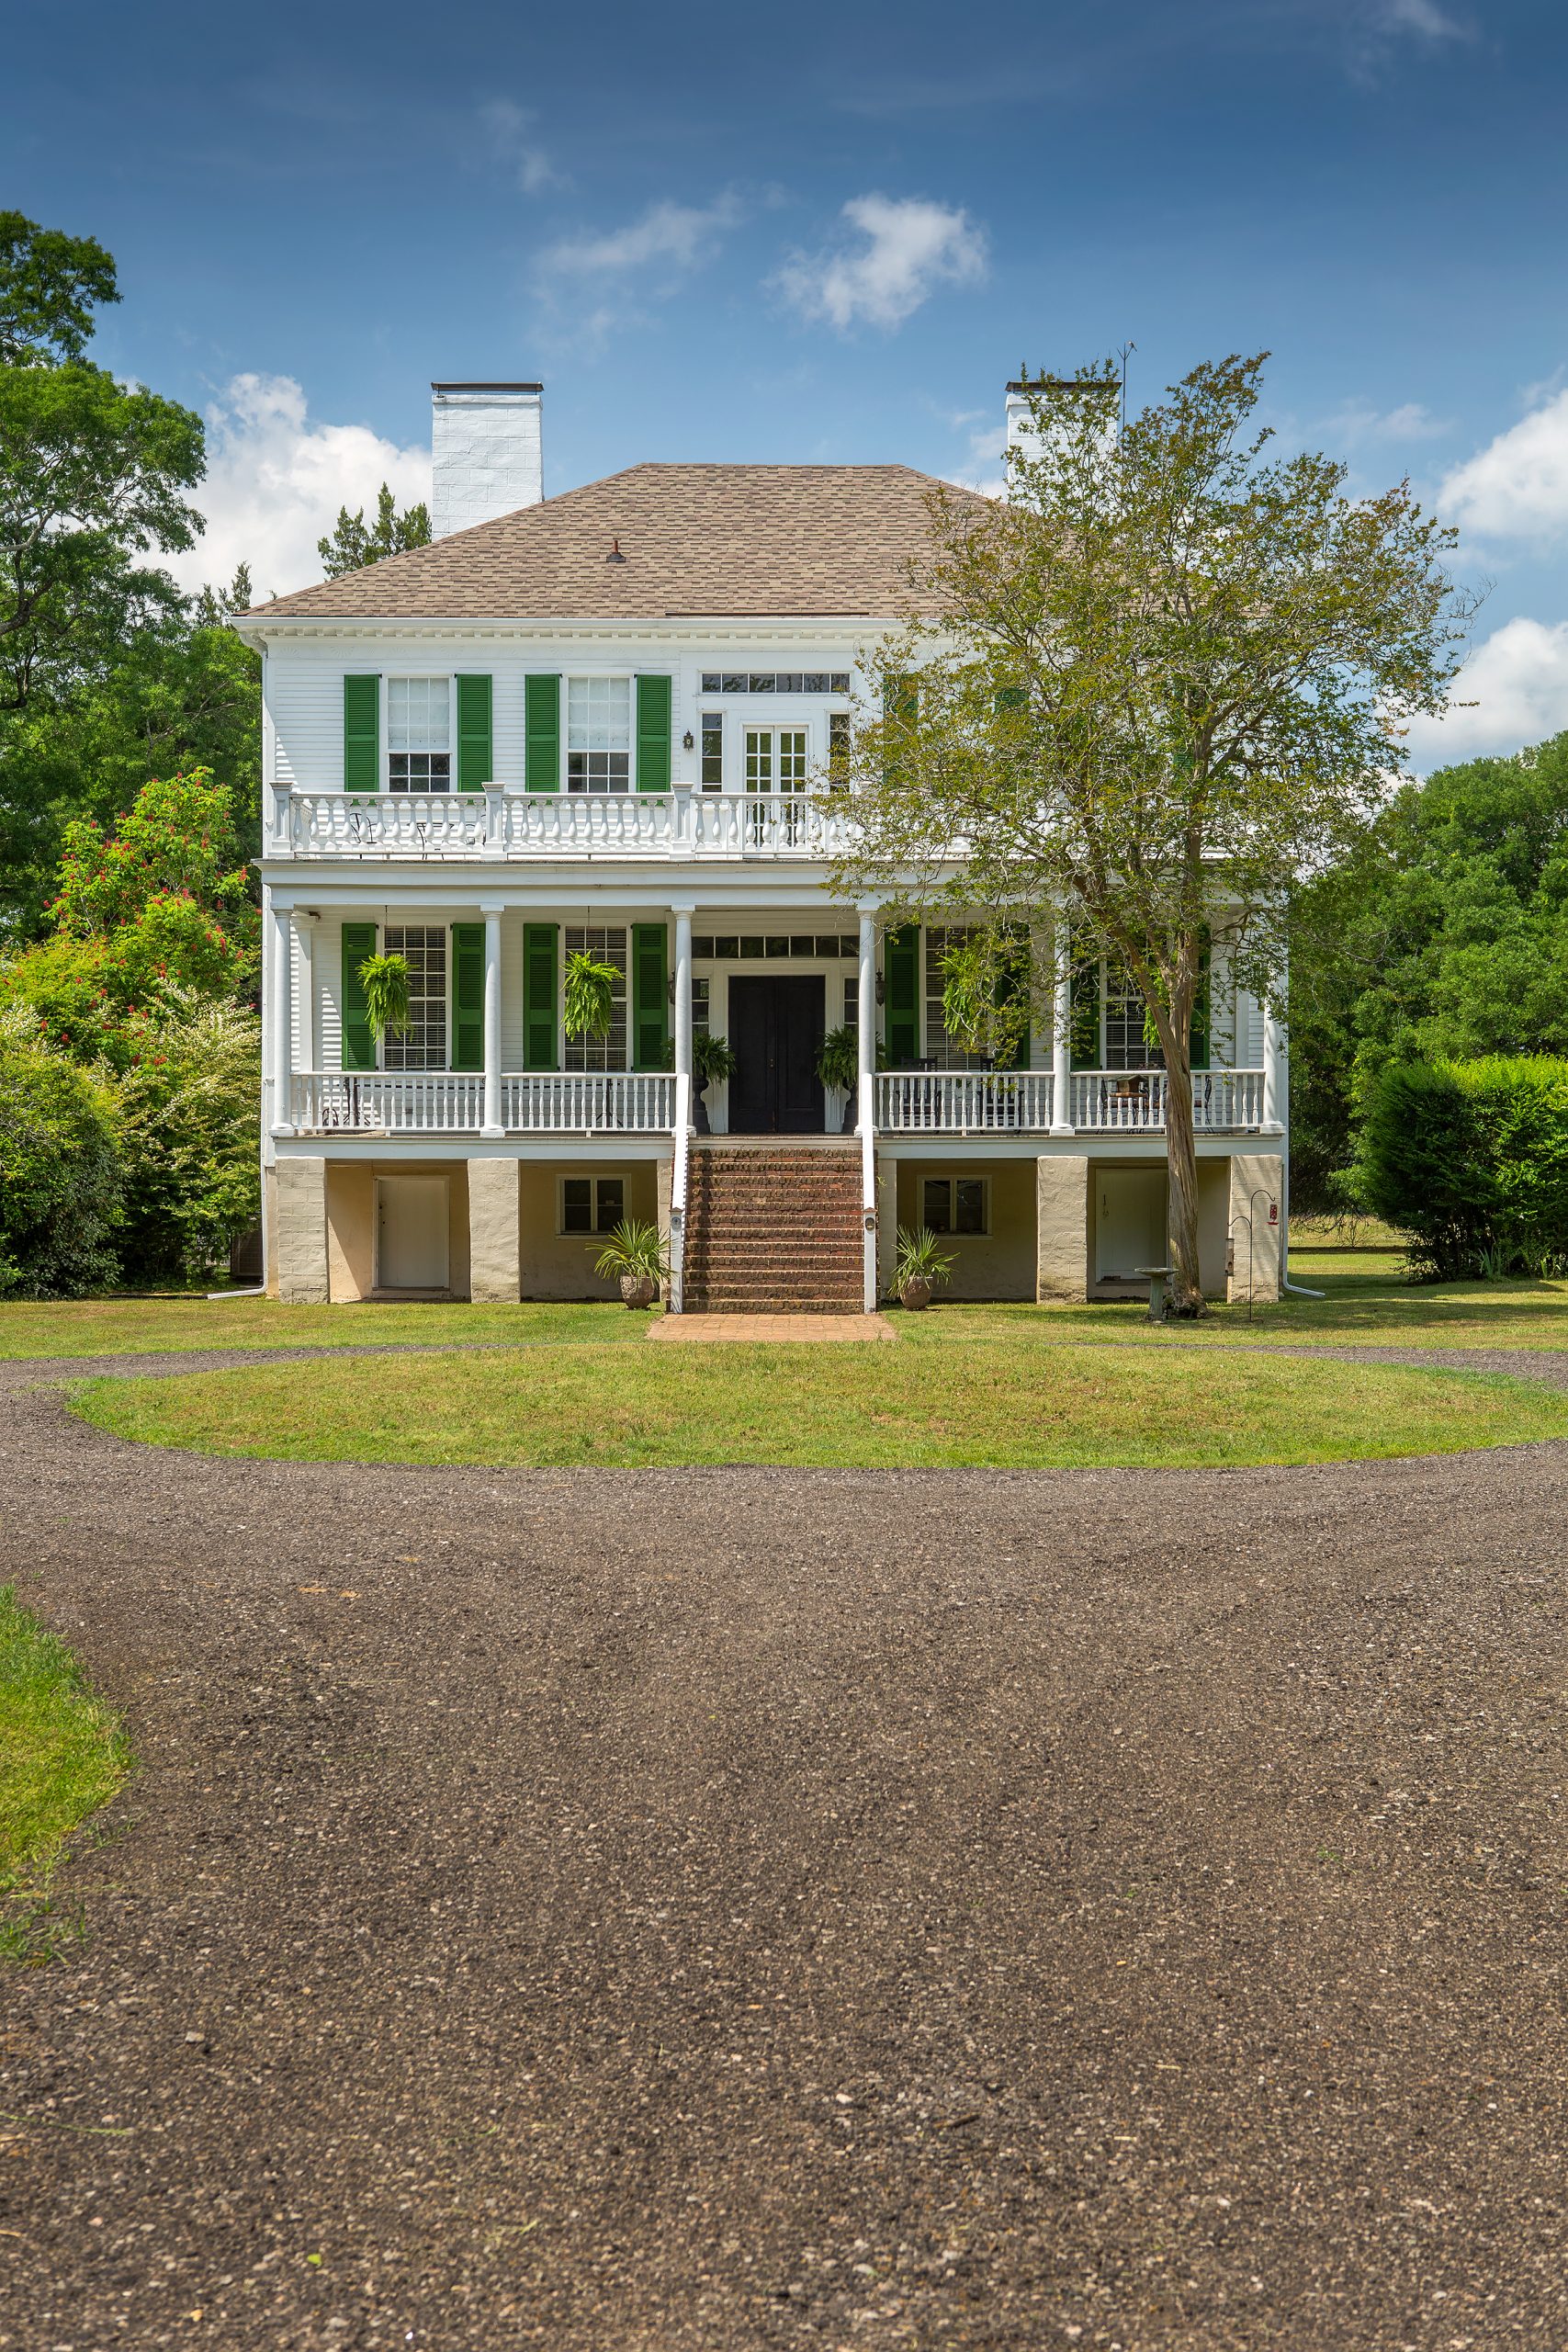 One of the oldest homes in Richland County, Grovewood is believed to have been built between 1765 and 1800 and moved to its current site in 1835. The home was later saved from destruction in 1865 while two sisters, Frances Tucker Hopkins and Christian Tucker Weston, lived as near neighbors: one at Grovewood and one at Wavering Place. The antebellum home, with a majestic allée of pecan trees, was bought by Mary Ellen and Brian Barnwell from Fred Quattlebaum at auction in 2014.